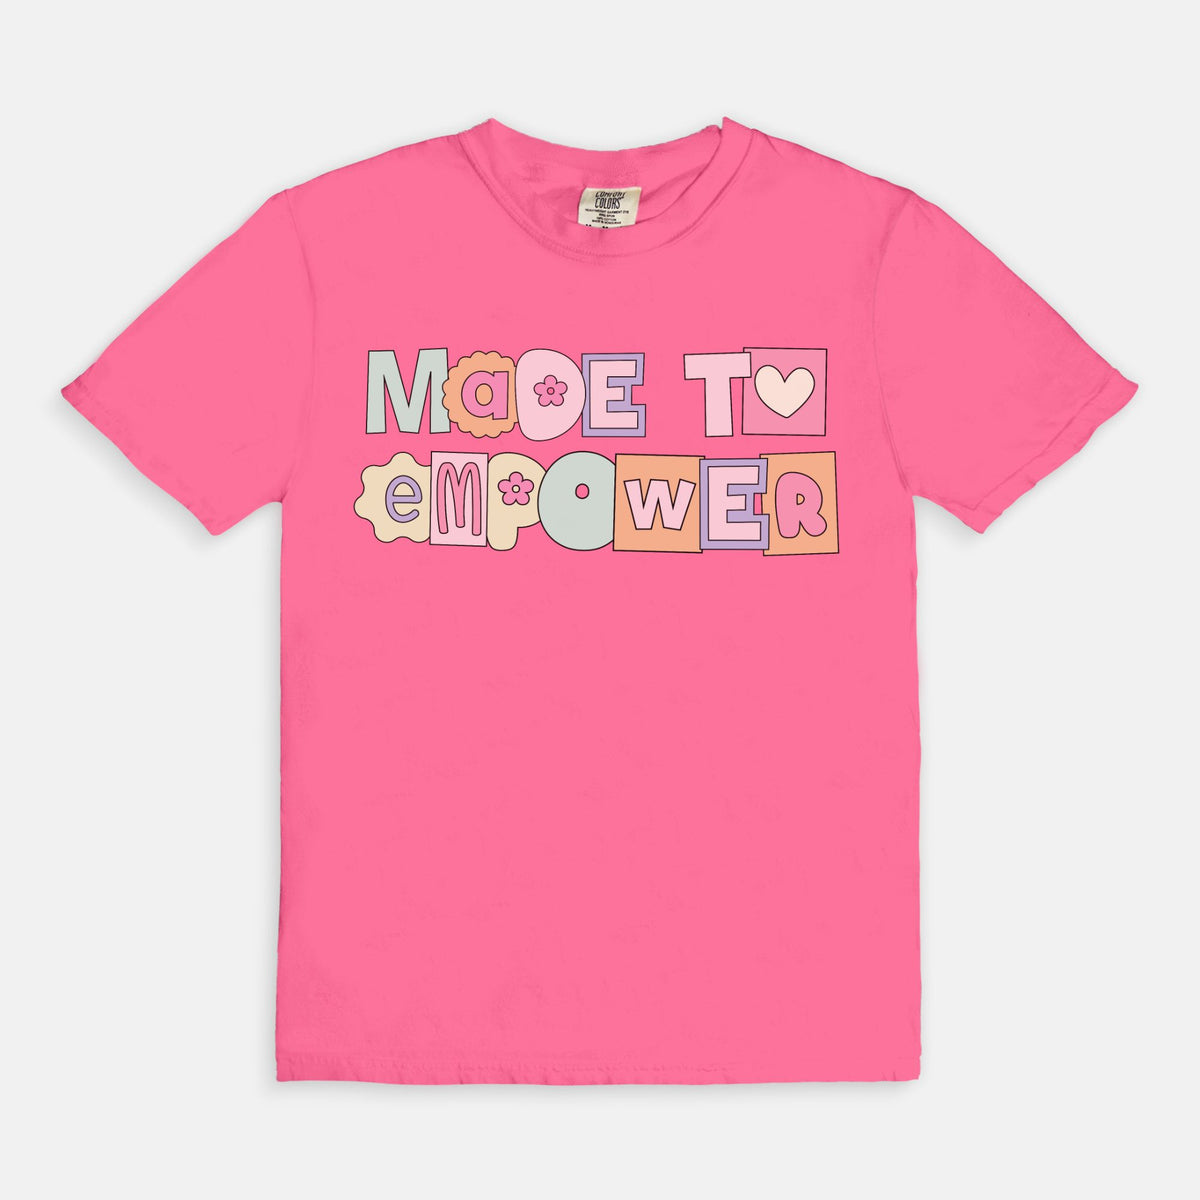 Made to Empower Collage Tee